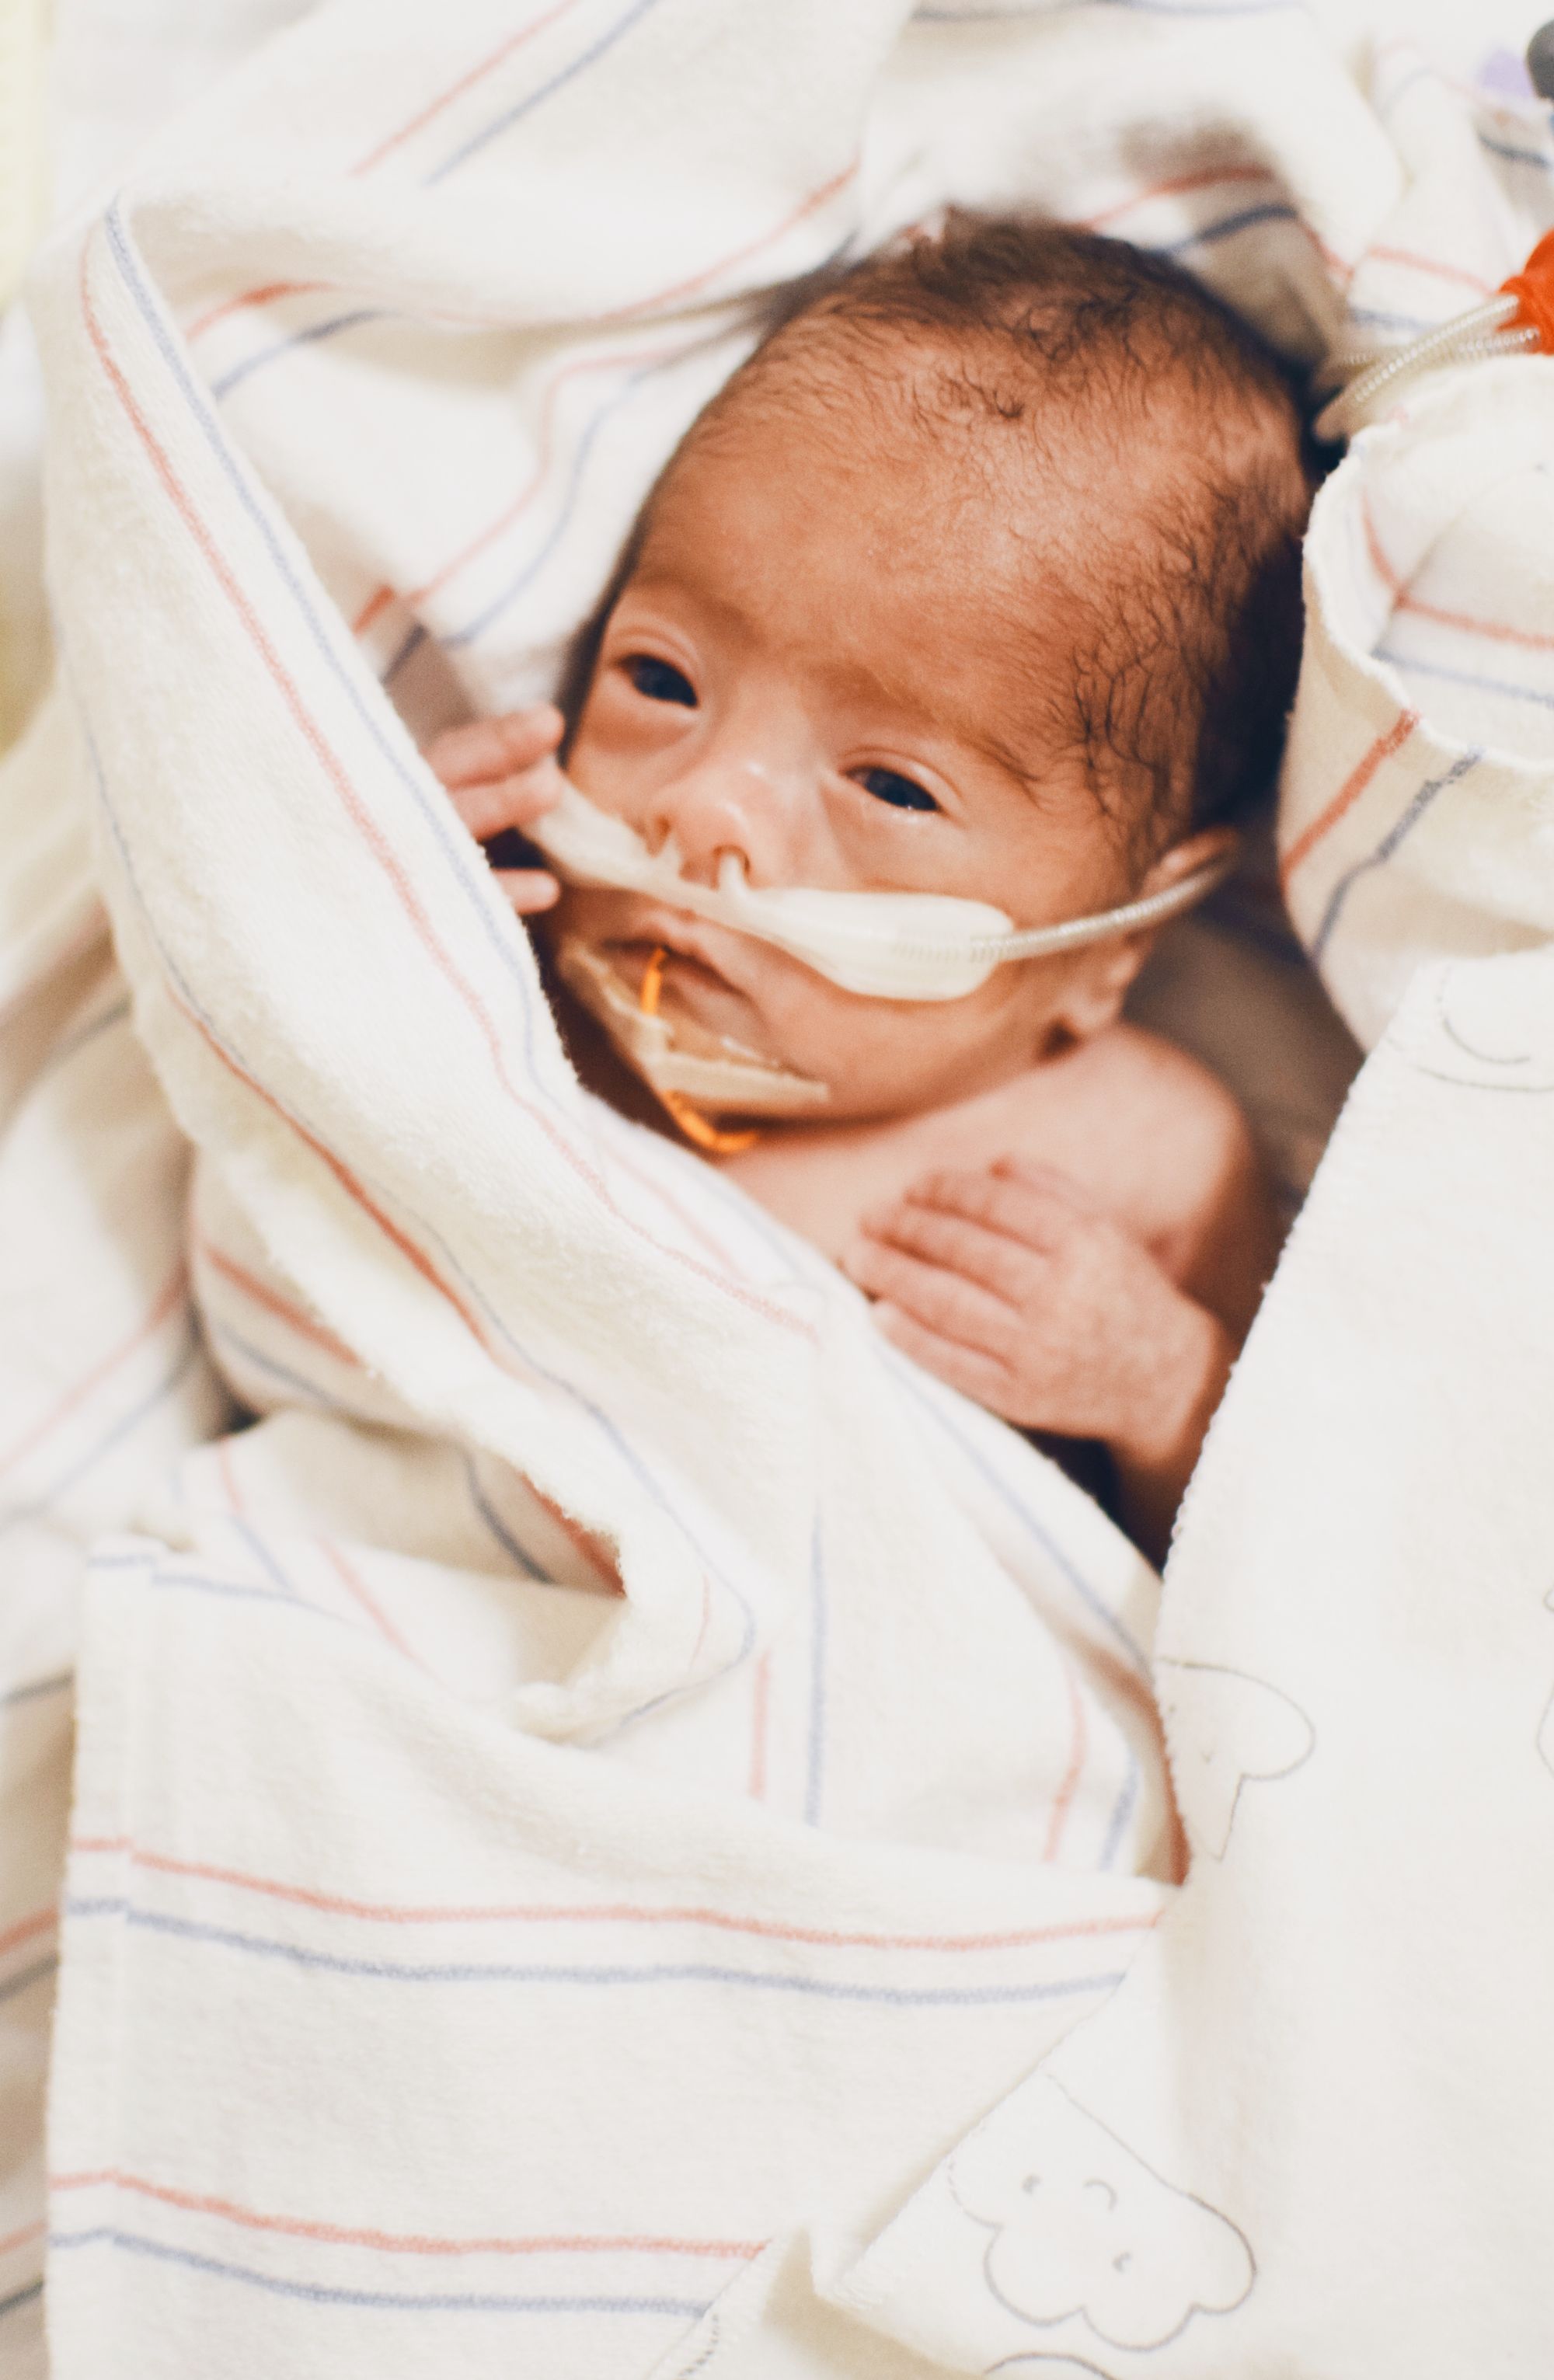 Pumping for Micropreemie | Miracle Medicine